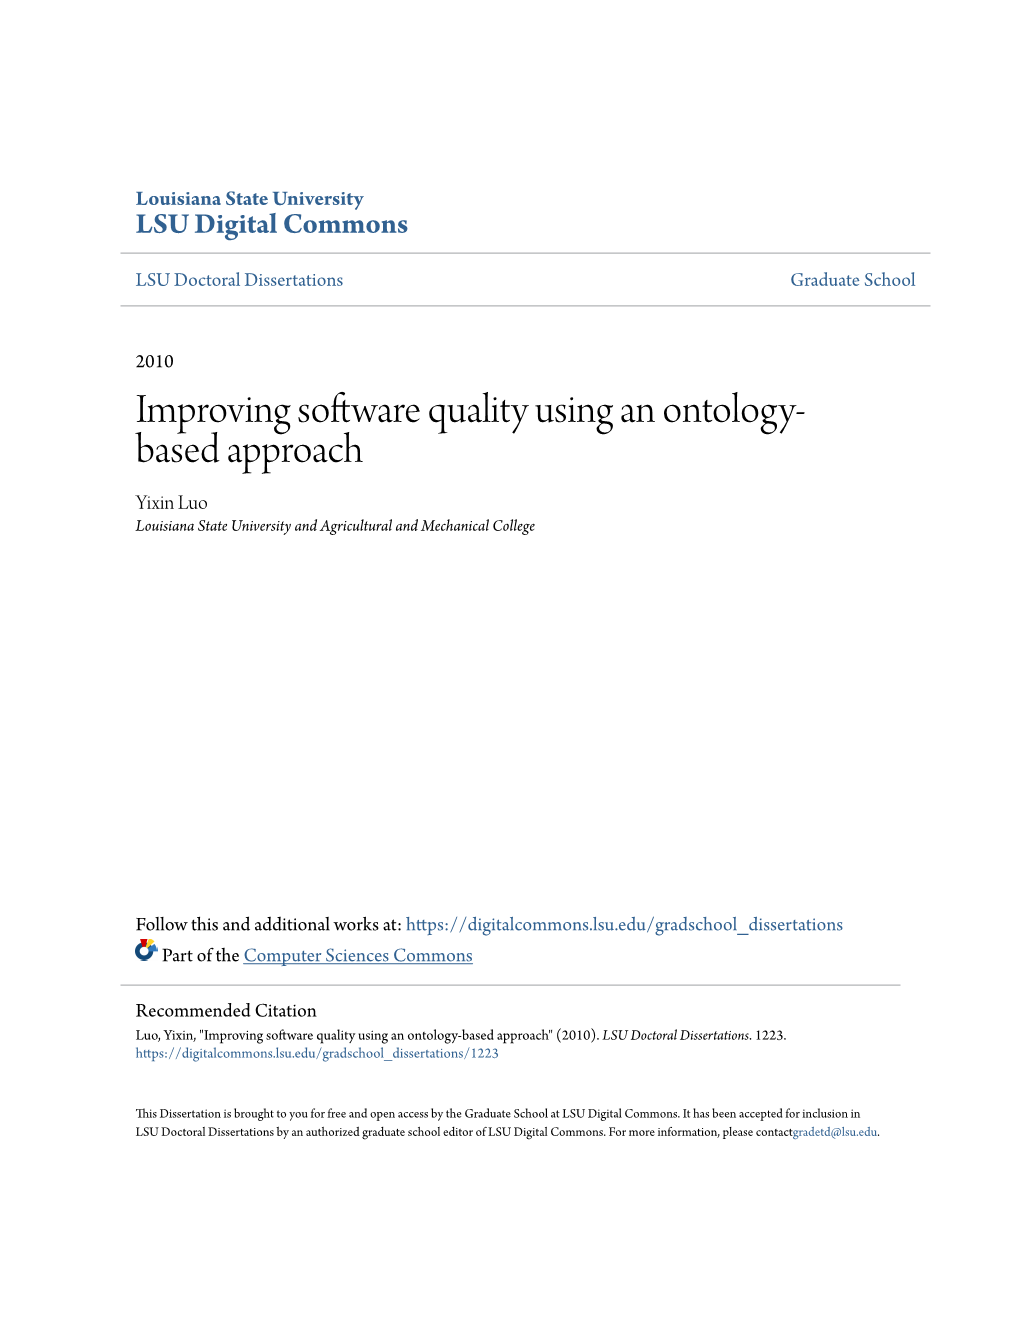 Improving Software Quality Using an Ontology-Based Approach" (2010)